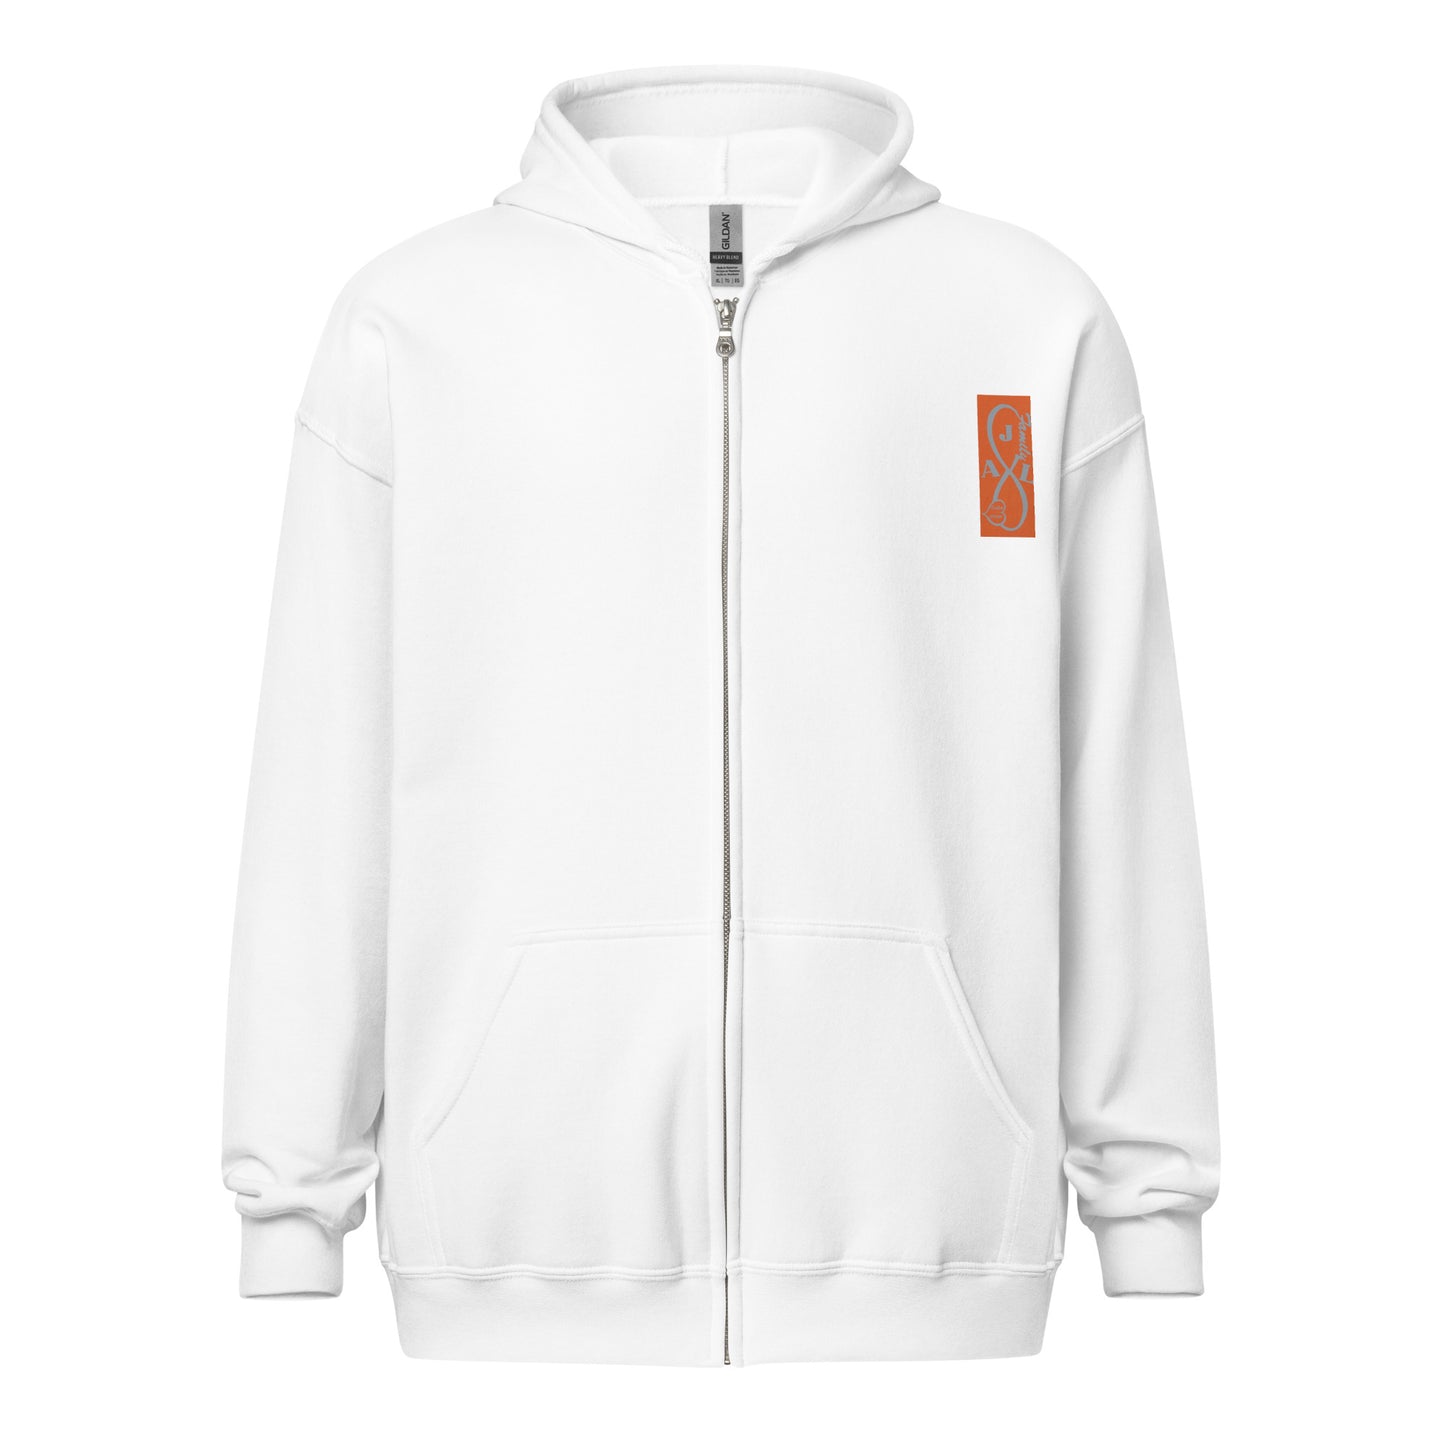 AJL Collection heavy blend zip hoodie